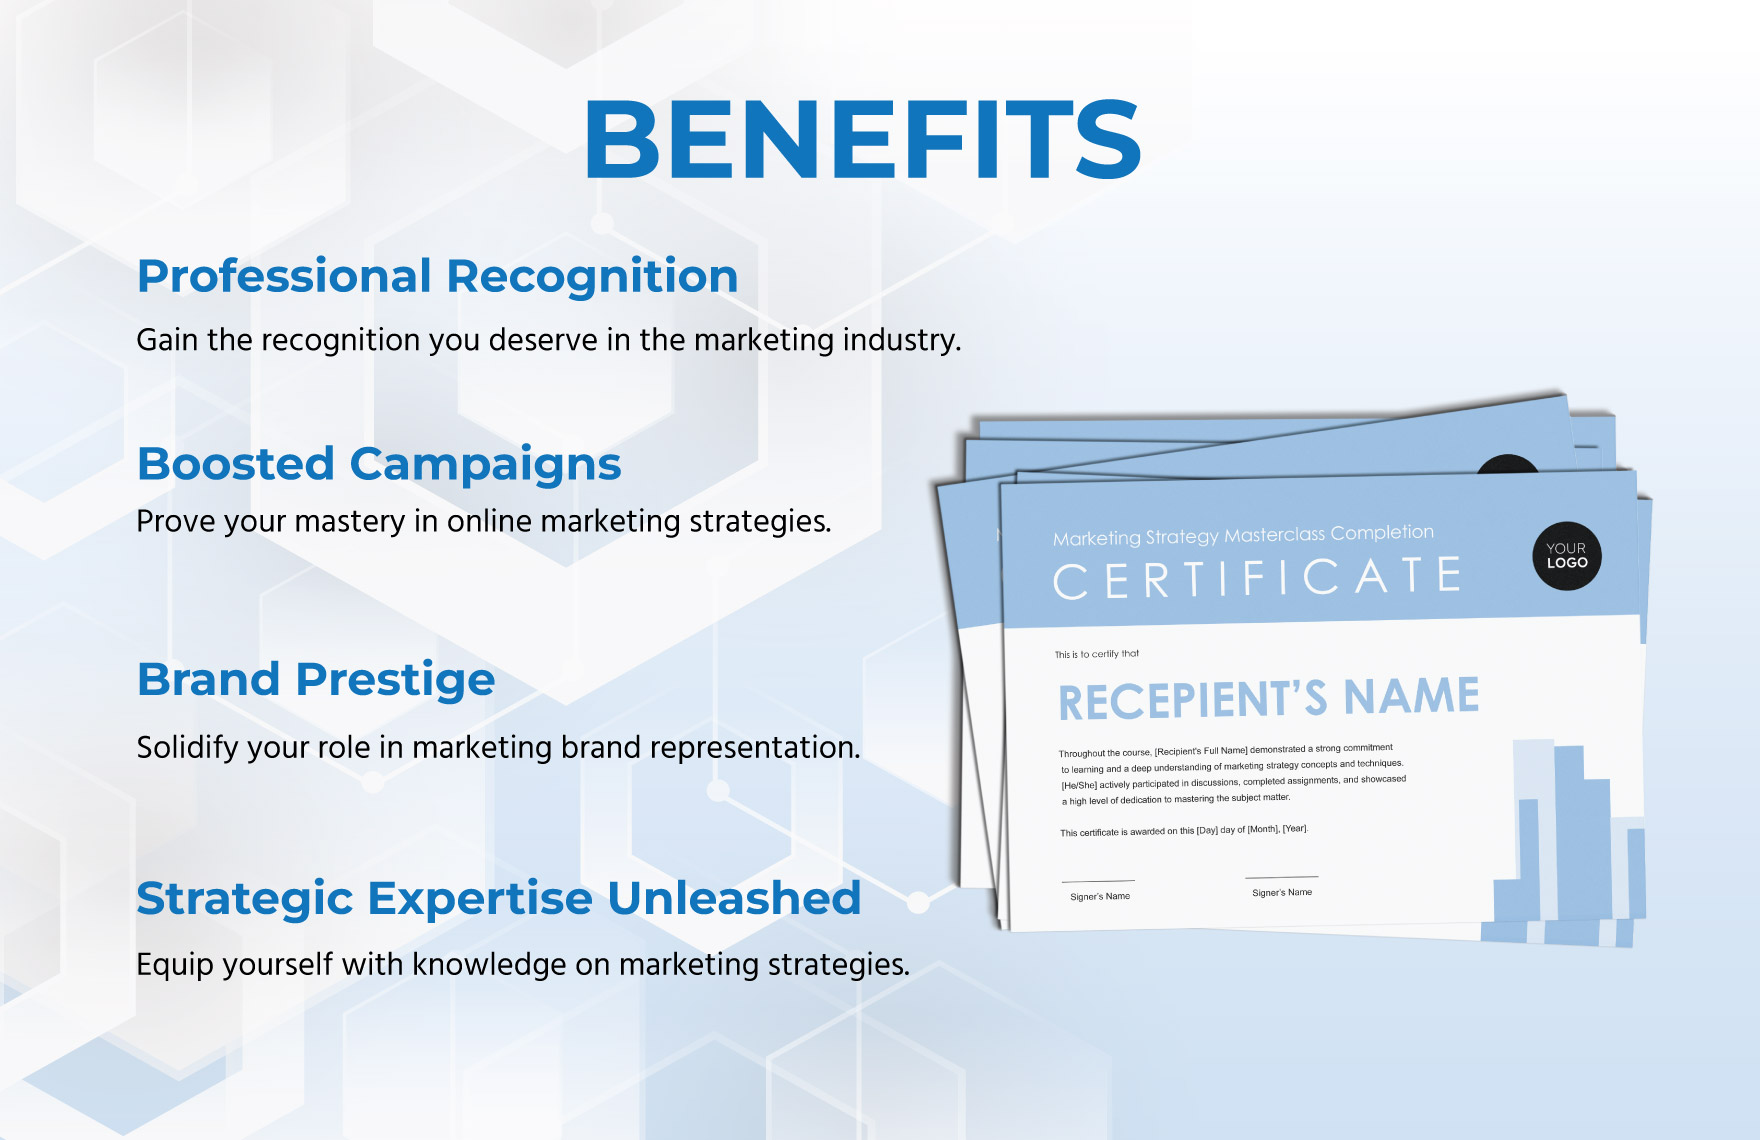 Marketing Strategy Masterclass Completion Certificate Template